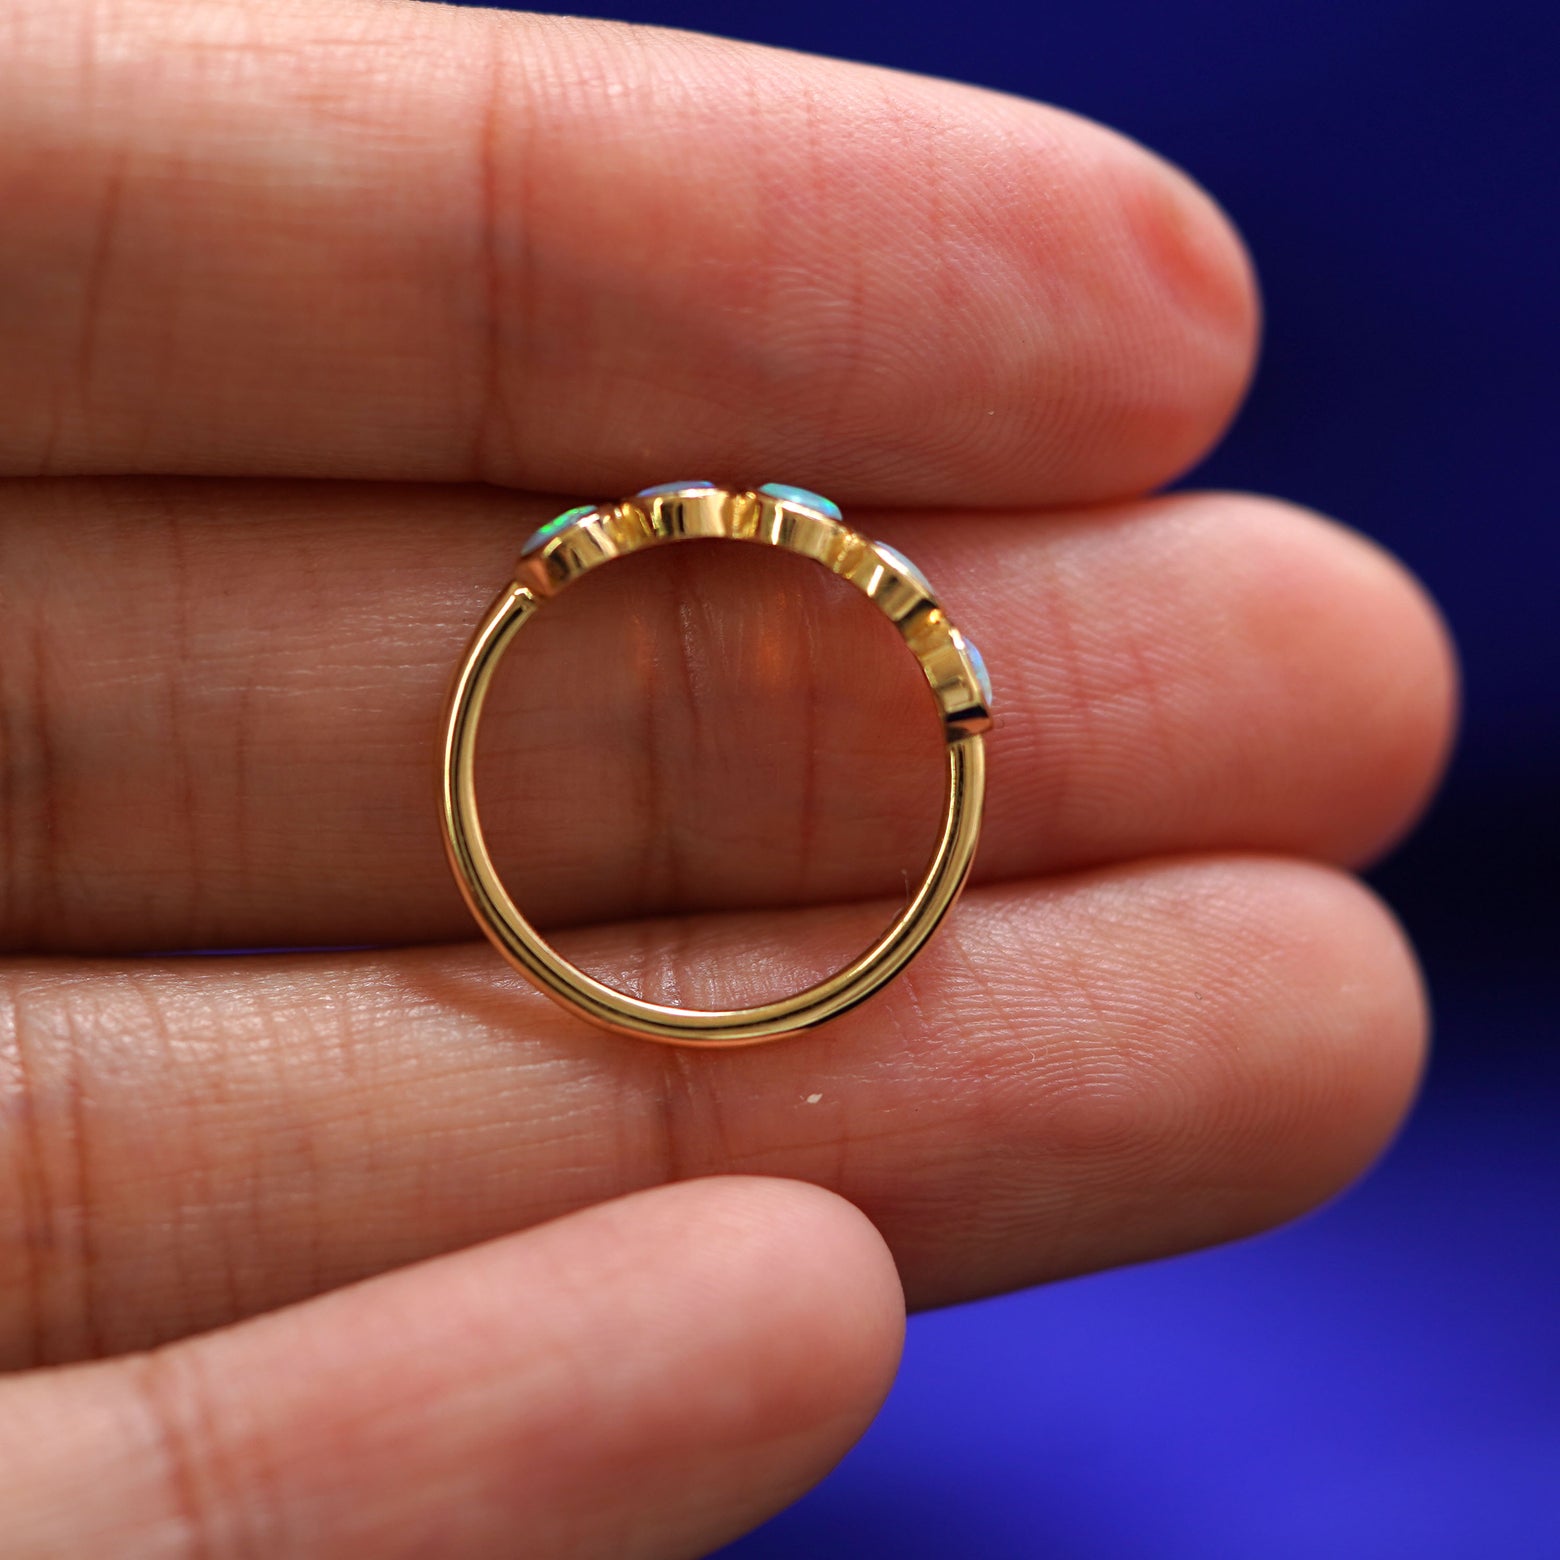 A solid gold 5 Opals Ring laying on a model's fingers to show the thickness of the band